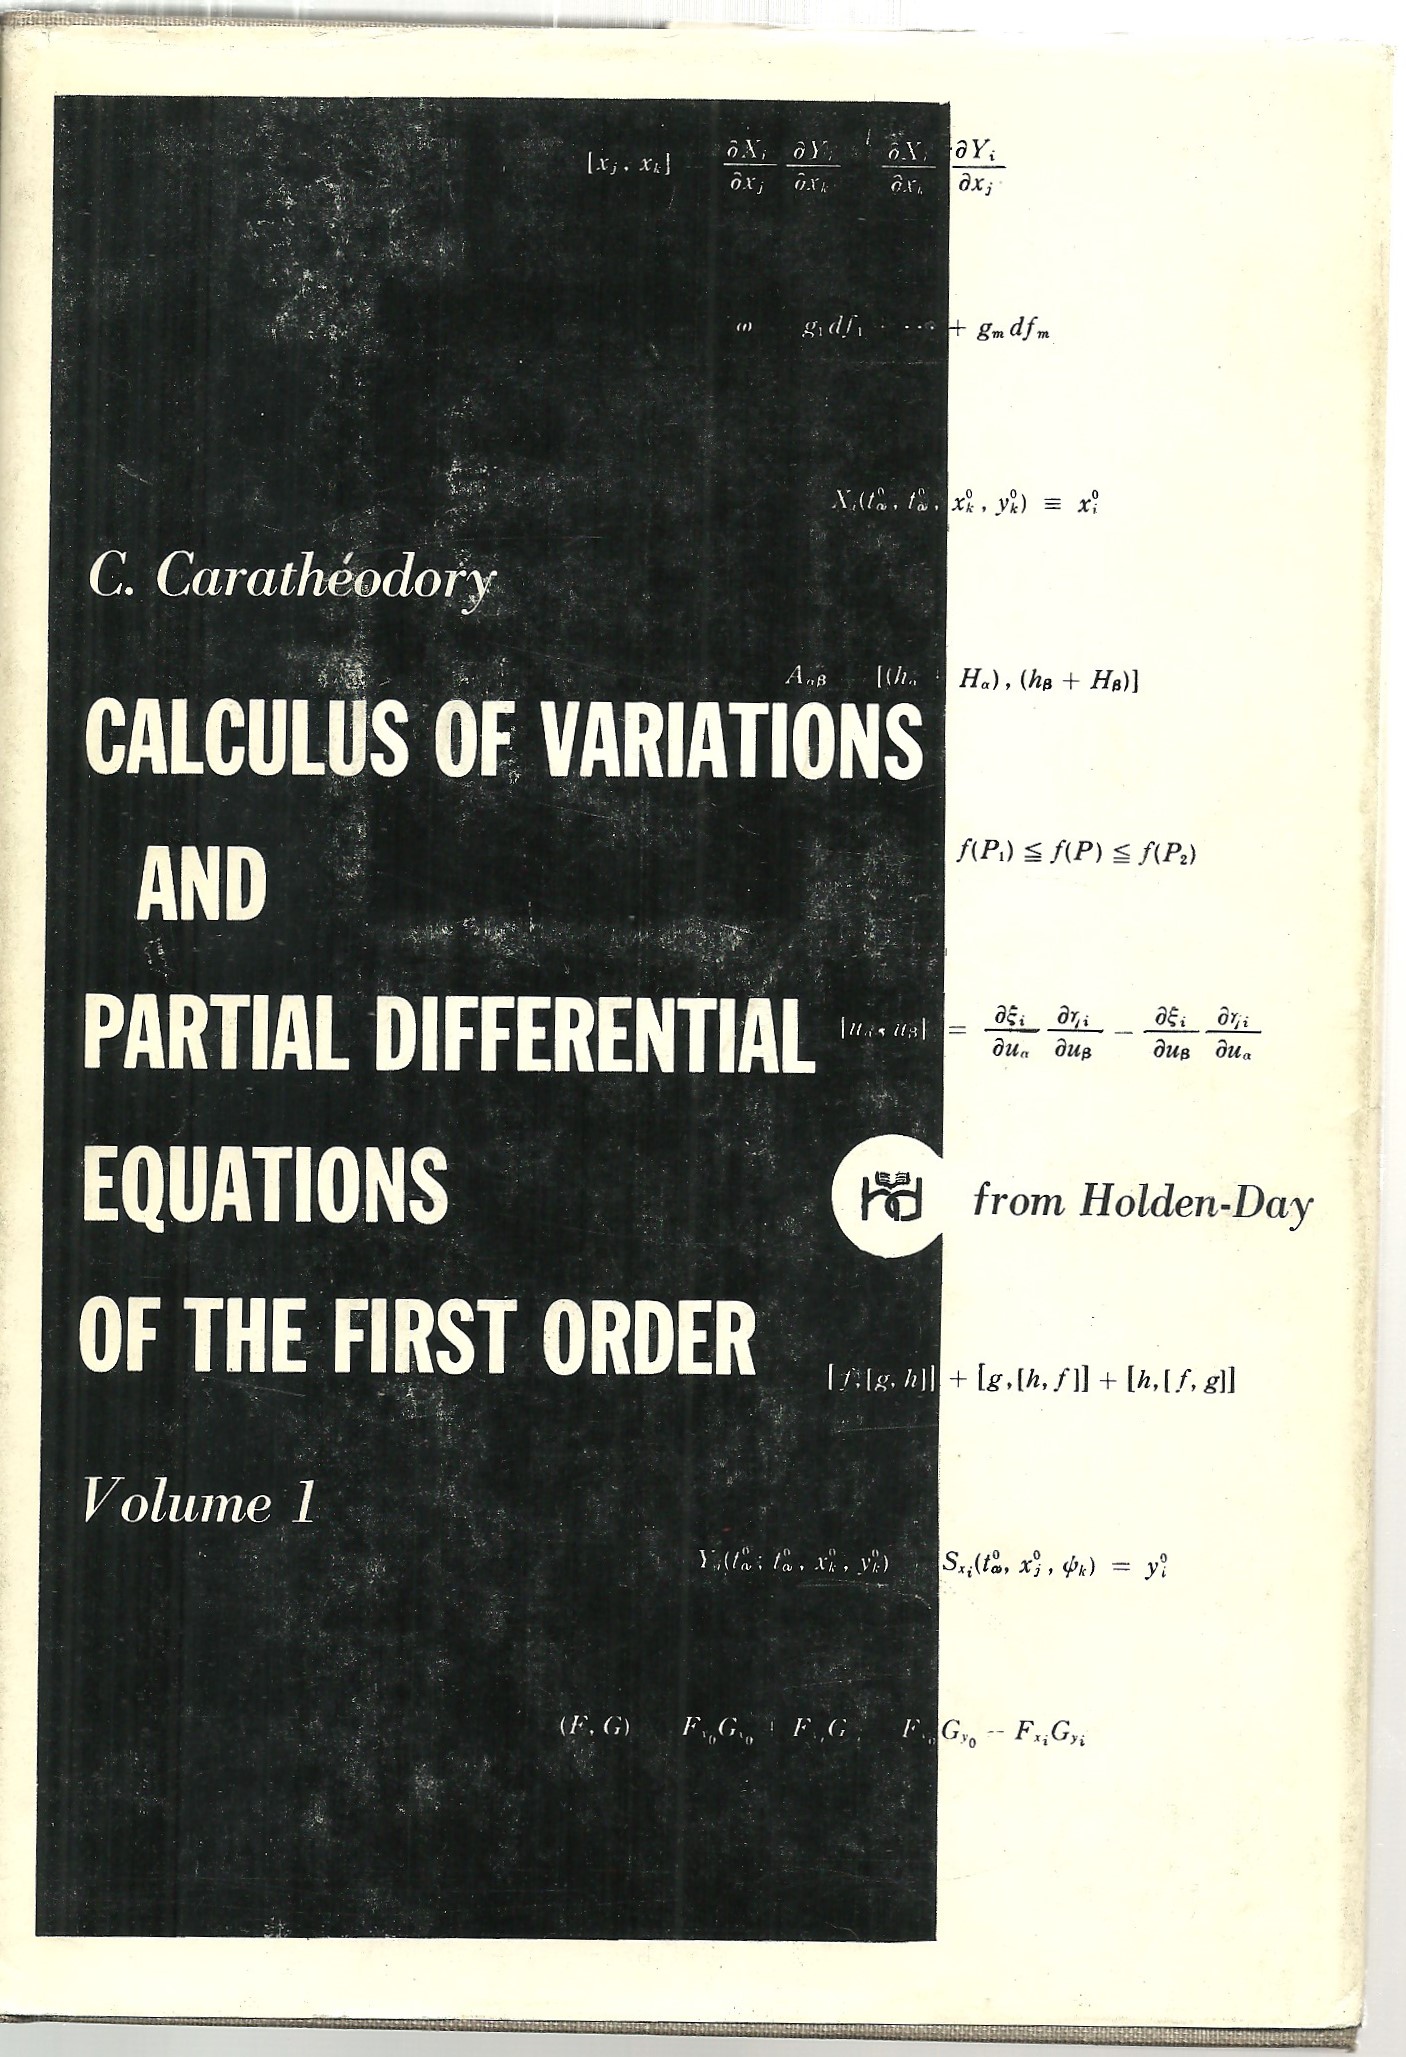 Calculus of Variations And Partial Differential Equations of The First Order - 2 Volumes Set - C, Caratheodory, translated by Robert B. Dean and Julius J. Brandstatter